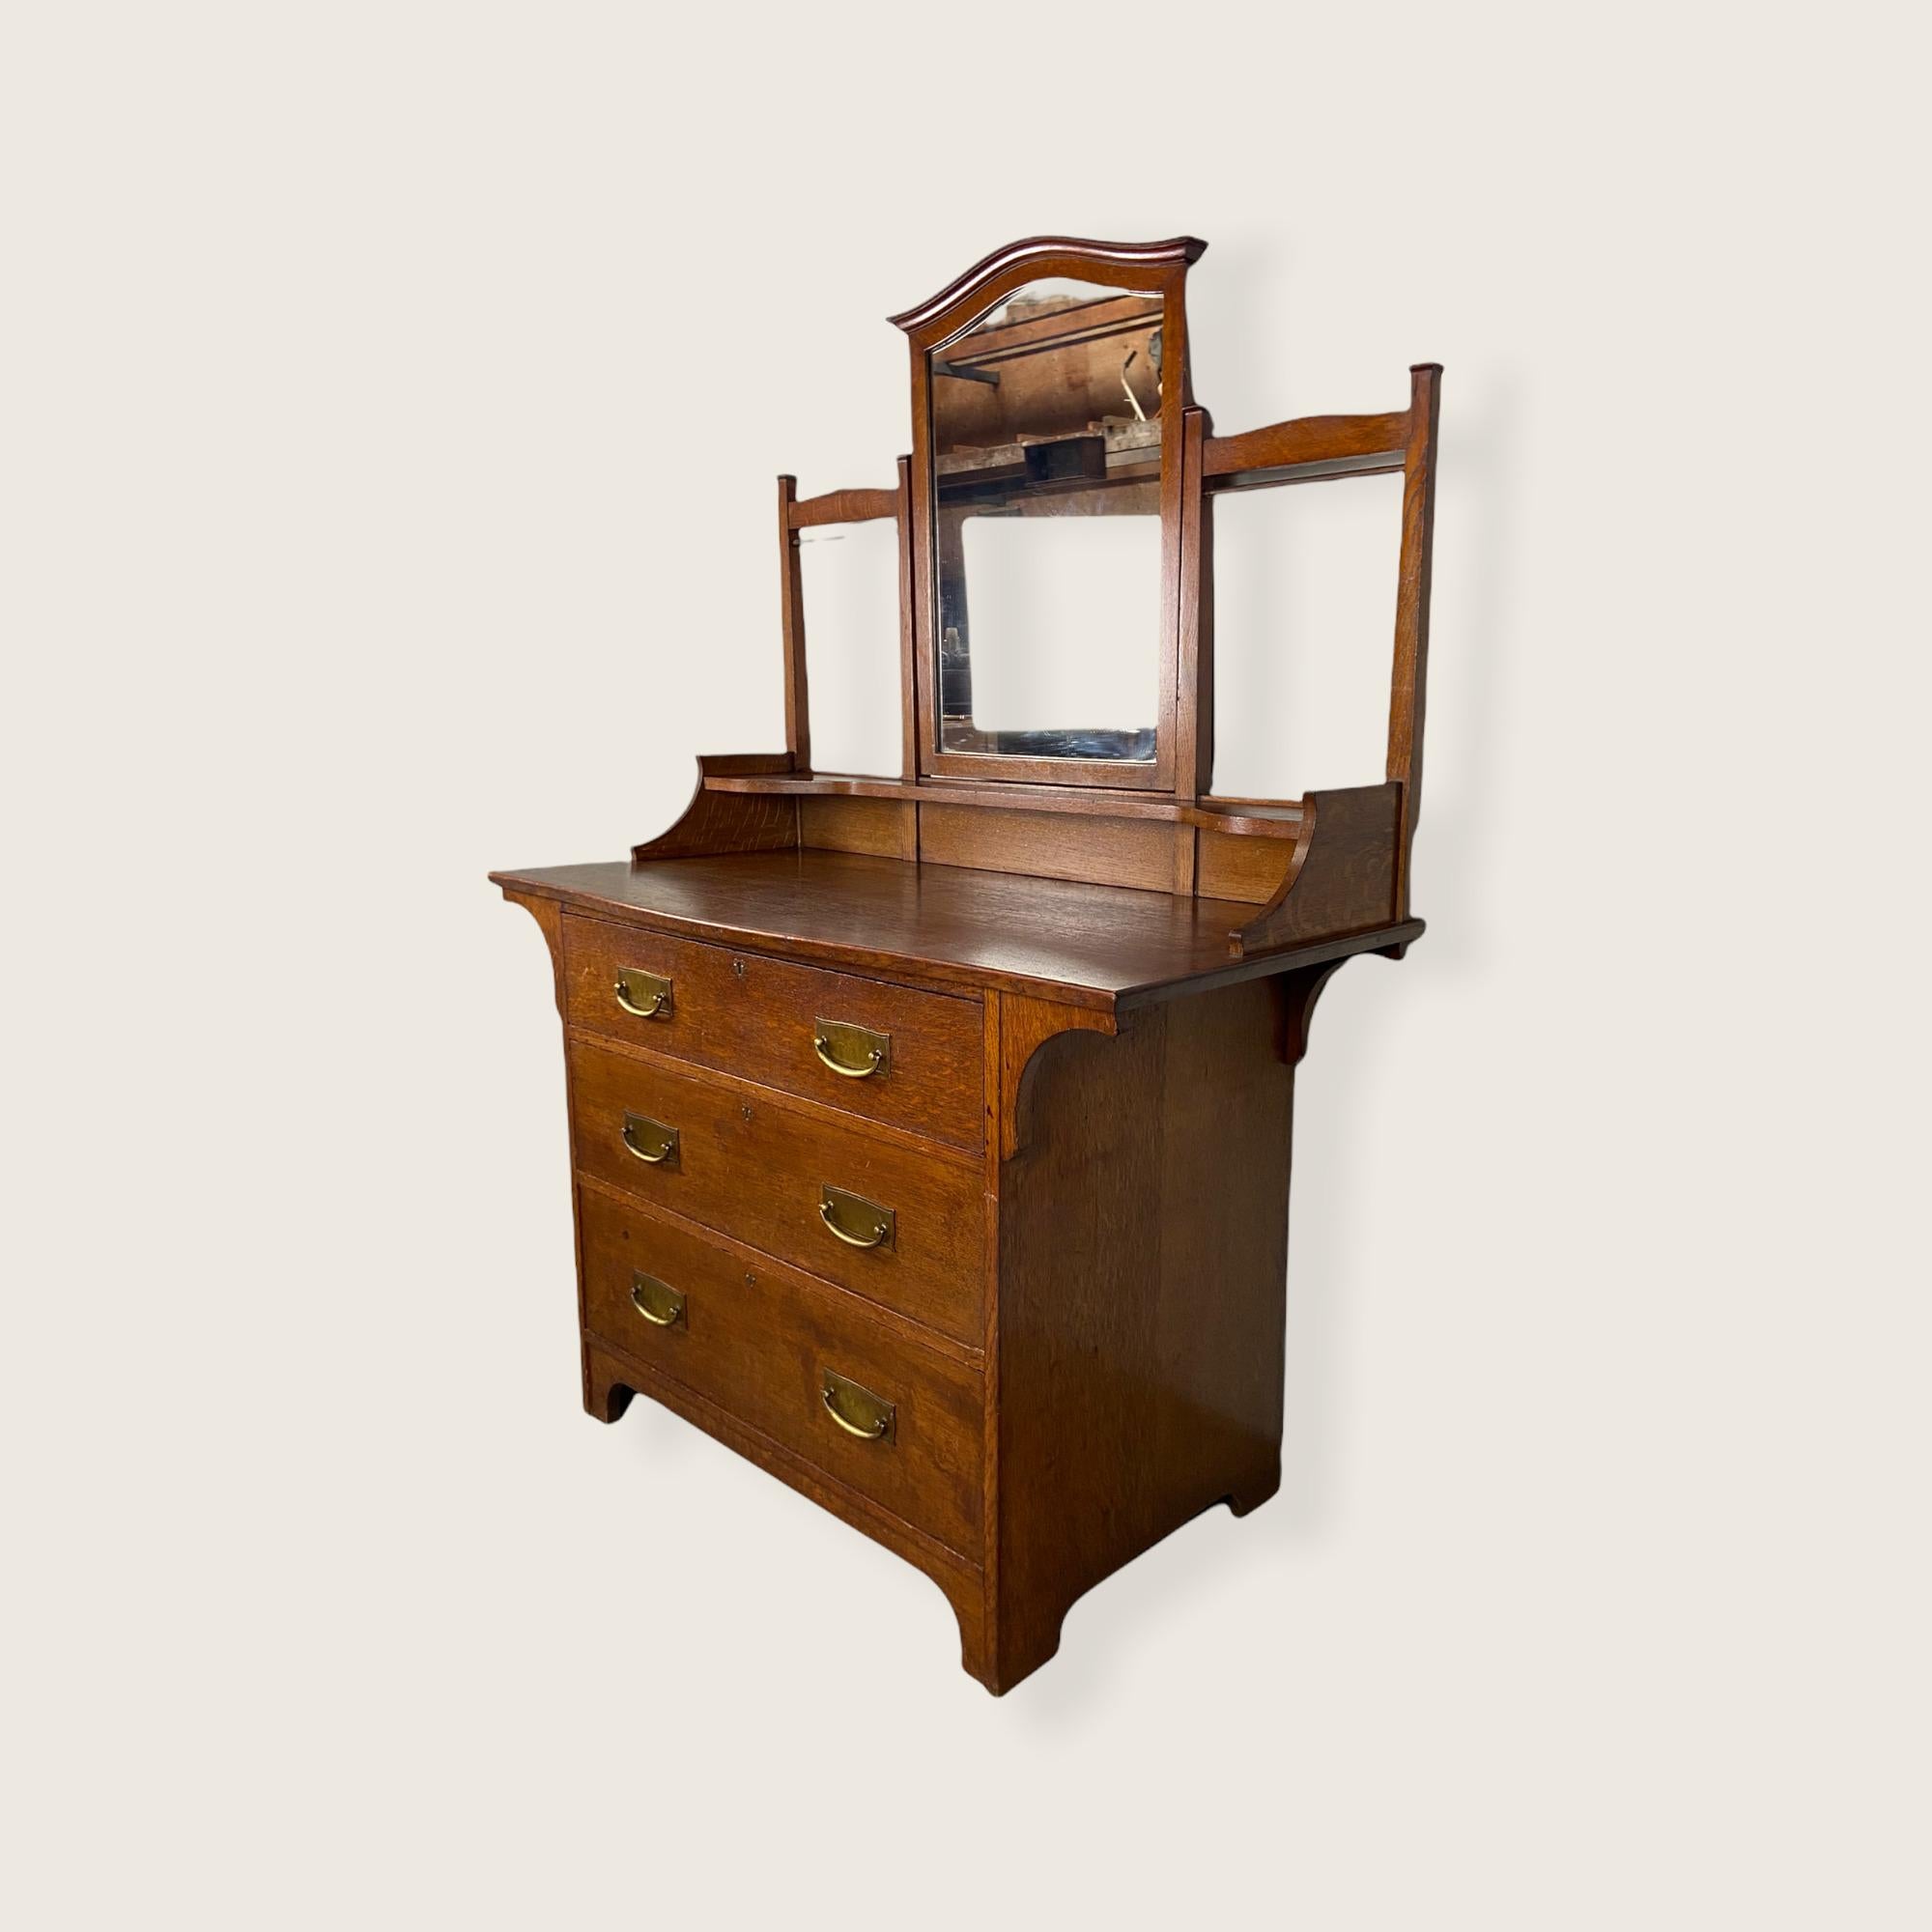 Arts & Crafts Dressing table from the company “Liberty & Co London”. Made of oak in the 1900s in England. Liberty & Co was found in 1875 and served as a vanguard for progressive, innovative design while responding to the demand for fashionable